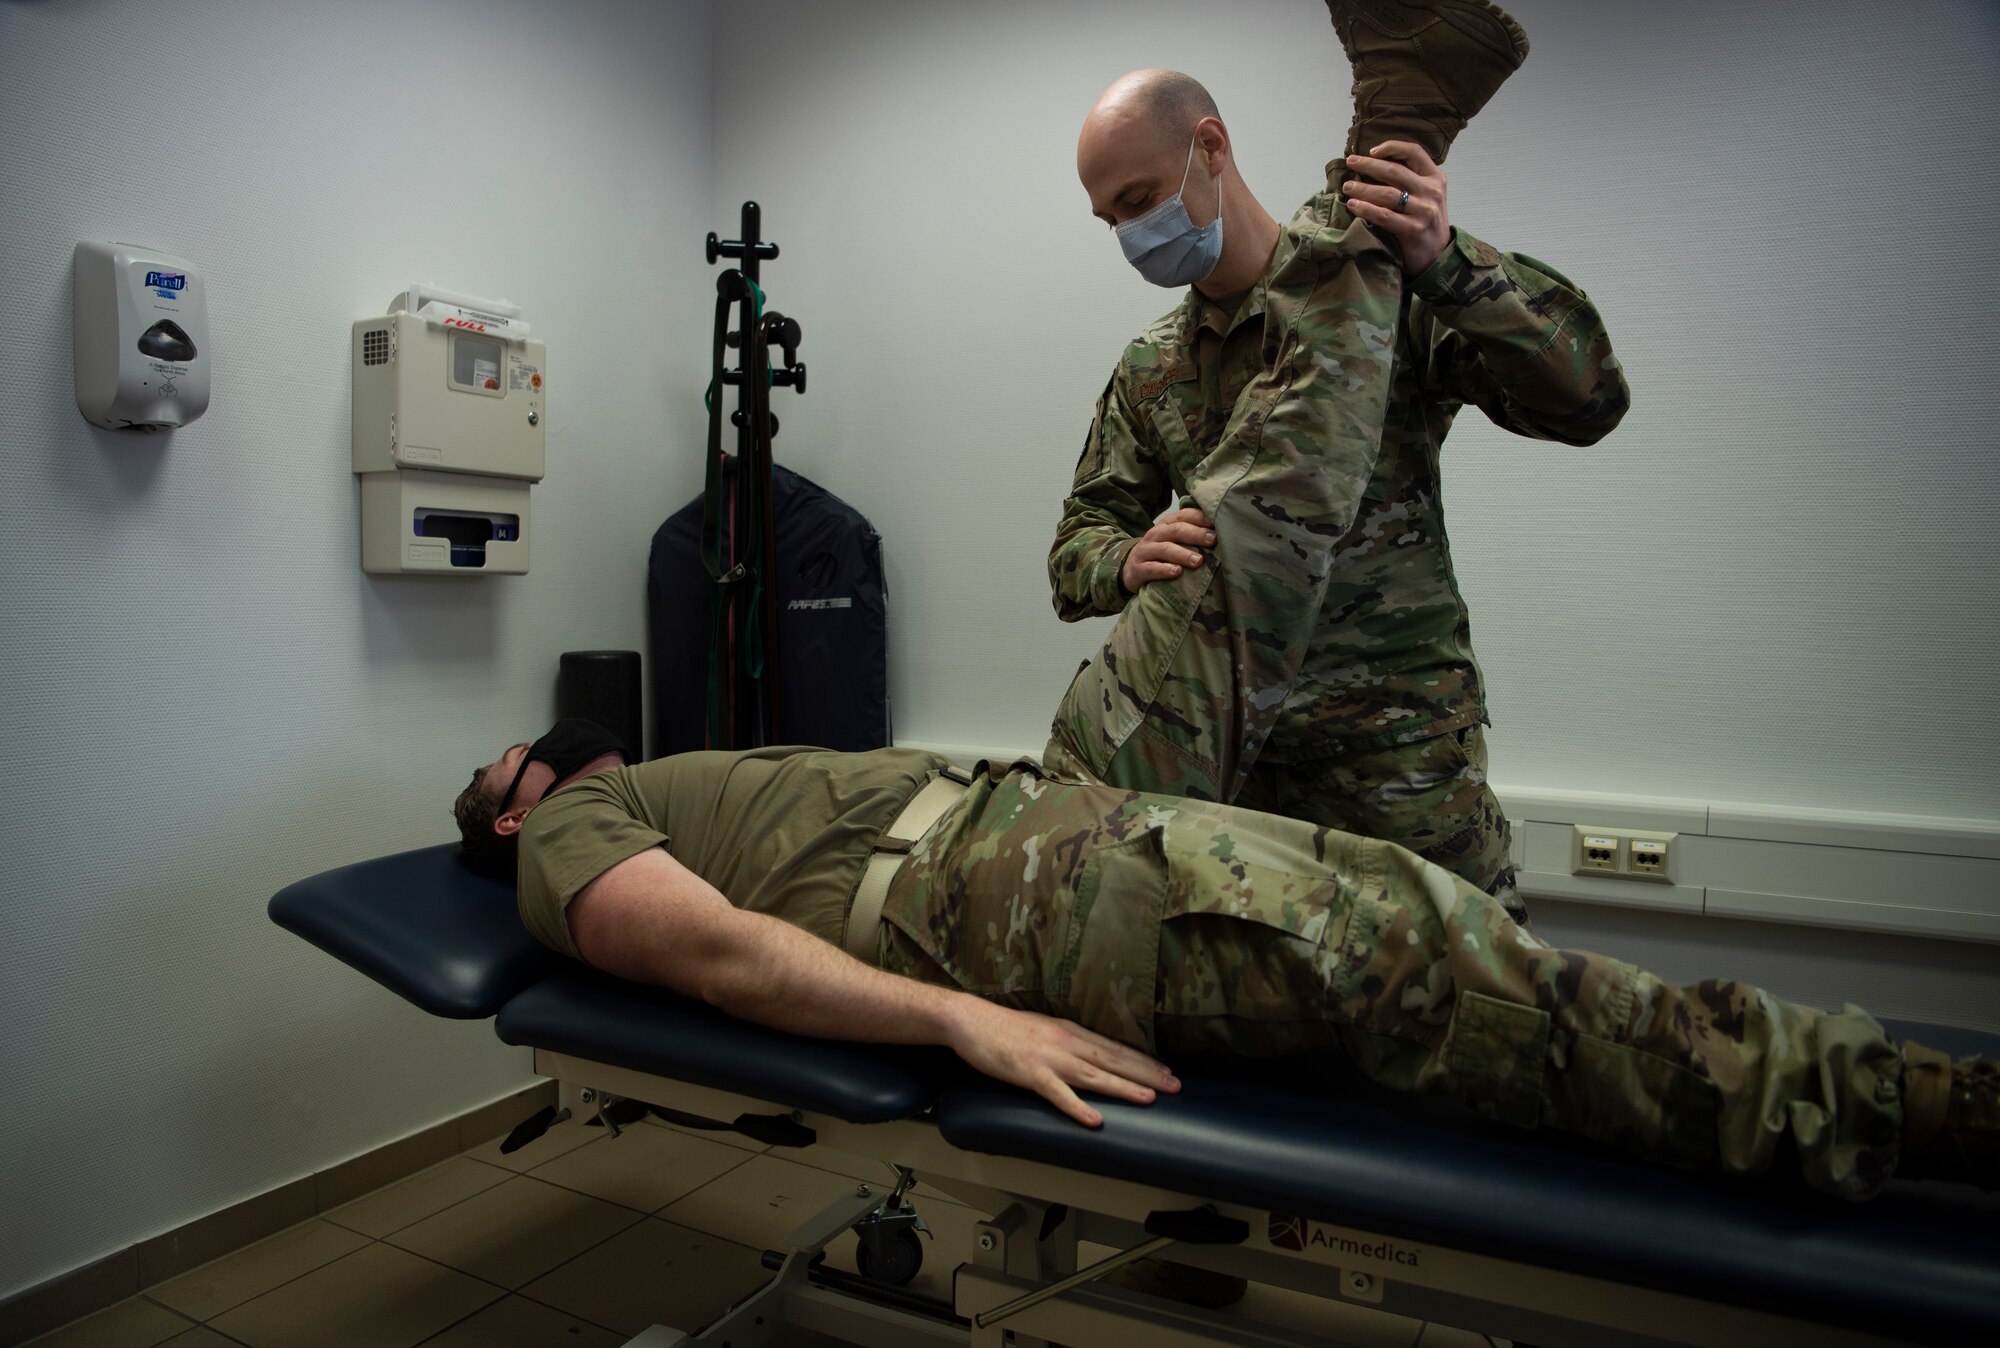 U.S. Air Force 1st Lt. Spencer Carrier, 86th Operational Medical Readiness Squadron physical therapist, performs a stretch on Staff Sgt. Randy Sayer, 86th OMRS physical therapy technician, at Ramstein Air Base, Germany, Jan. 13, 2021.